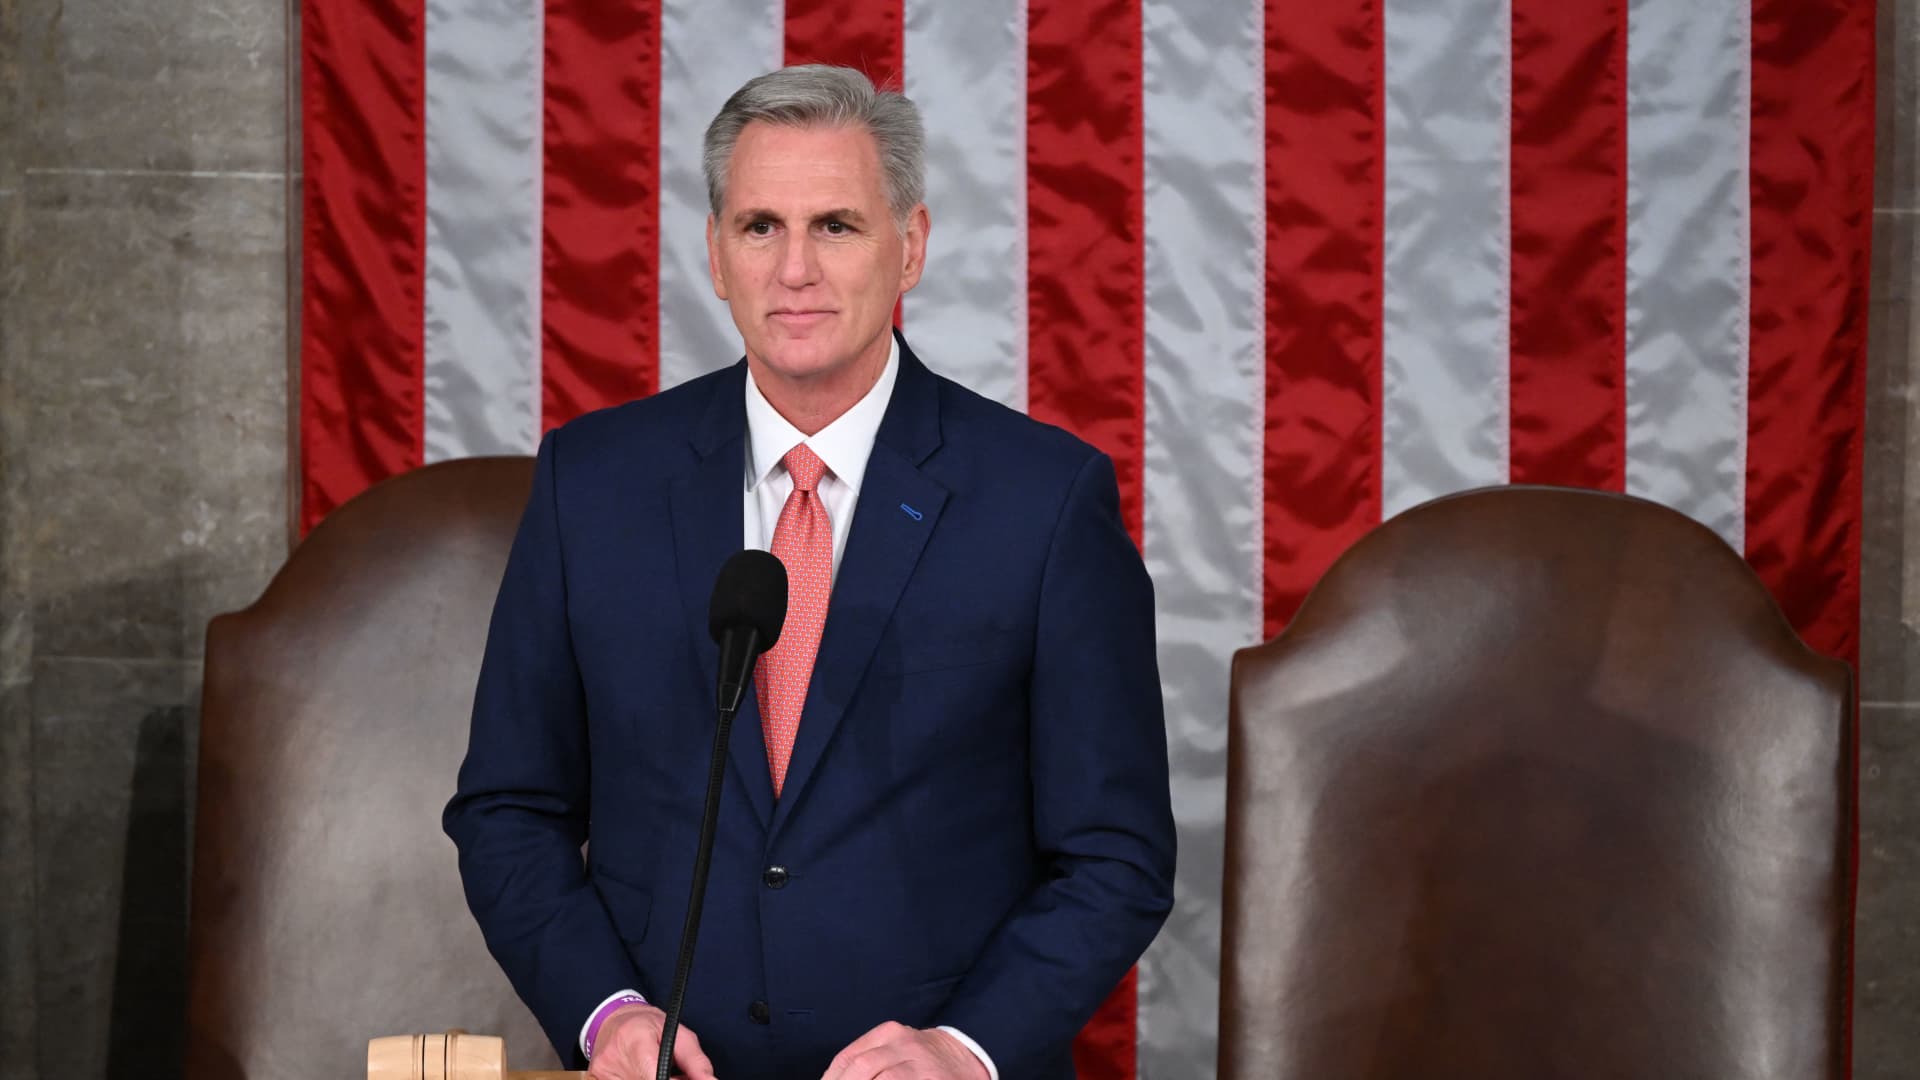 US Speaker of the House Kevin McCarthy arrives for the State of the Union address by US President Joe Biden at the US Capitol in Washington, DC, February 7, 2023.